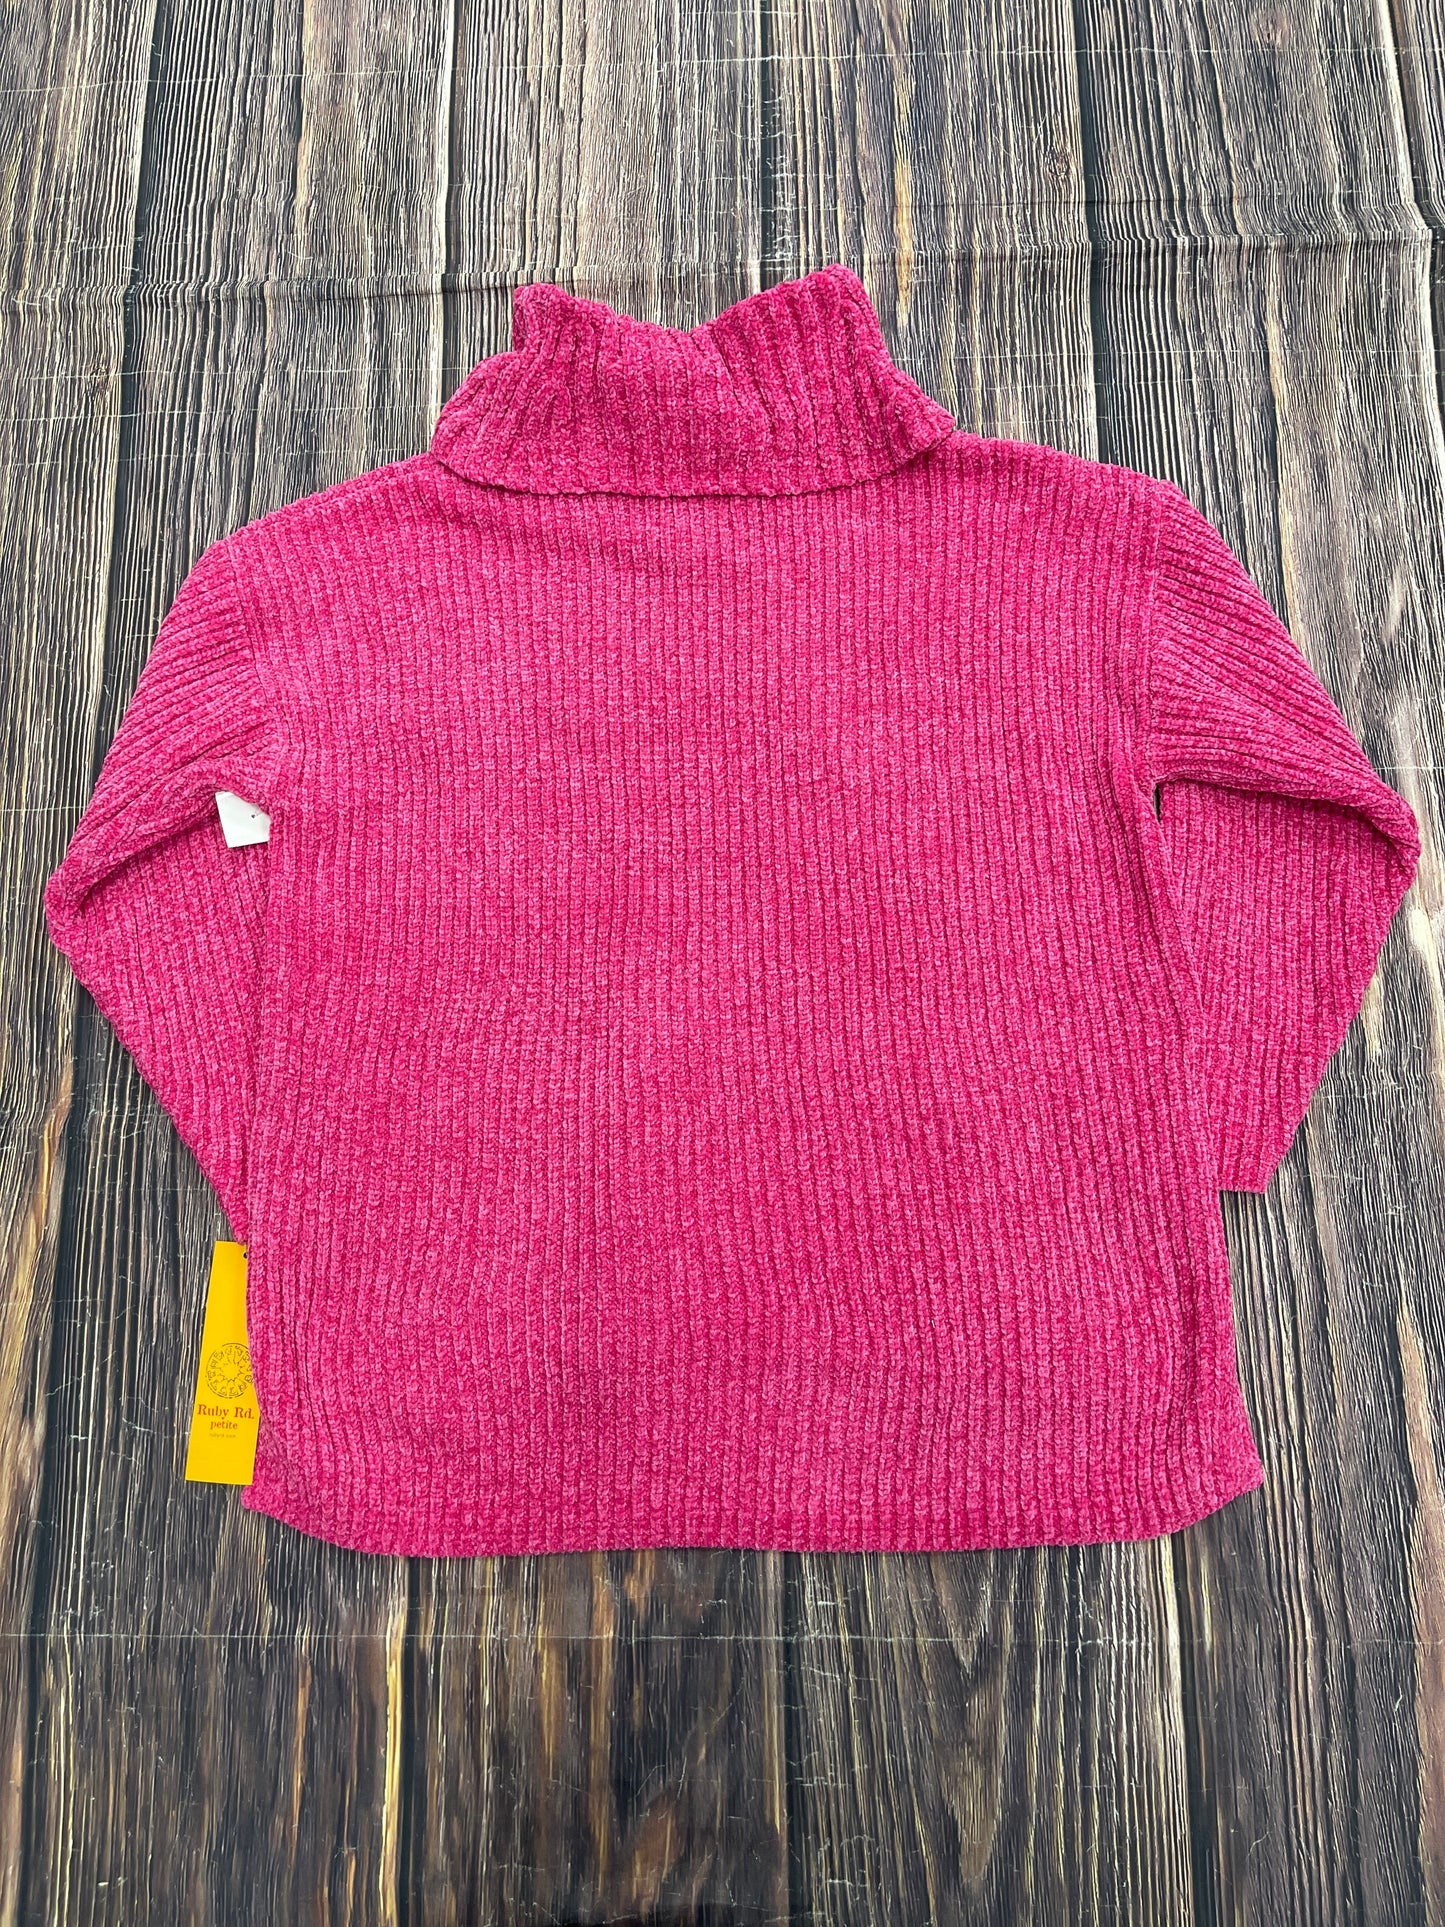 Sweater By Ruby Rd  Size: Petite  Medium